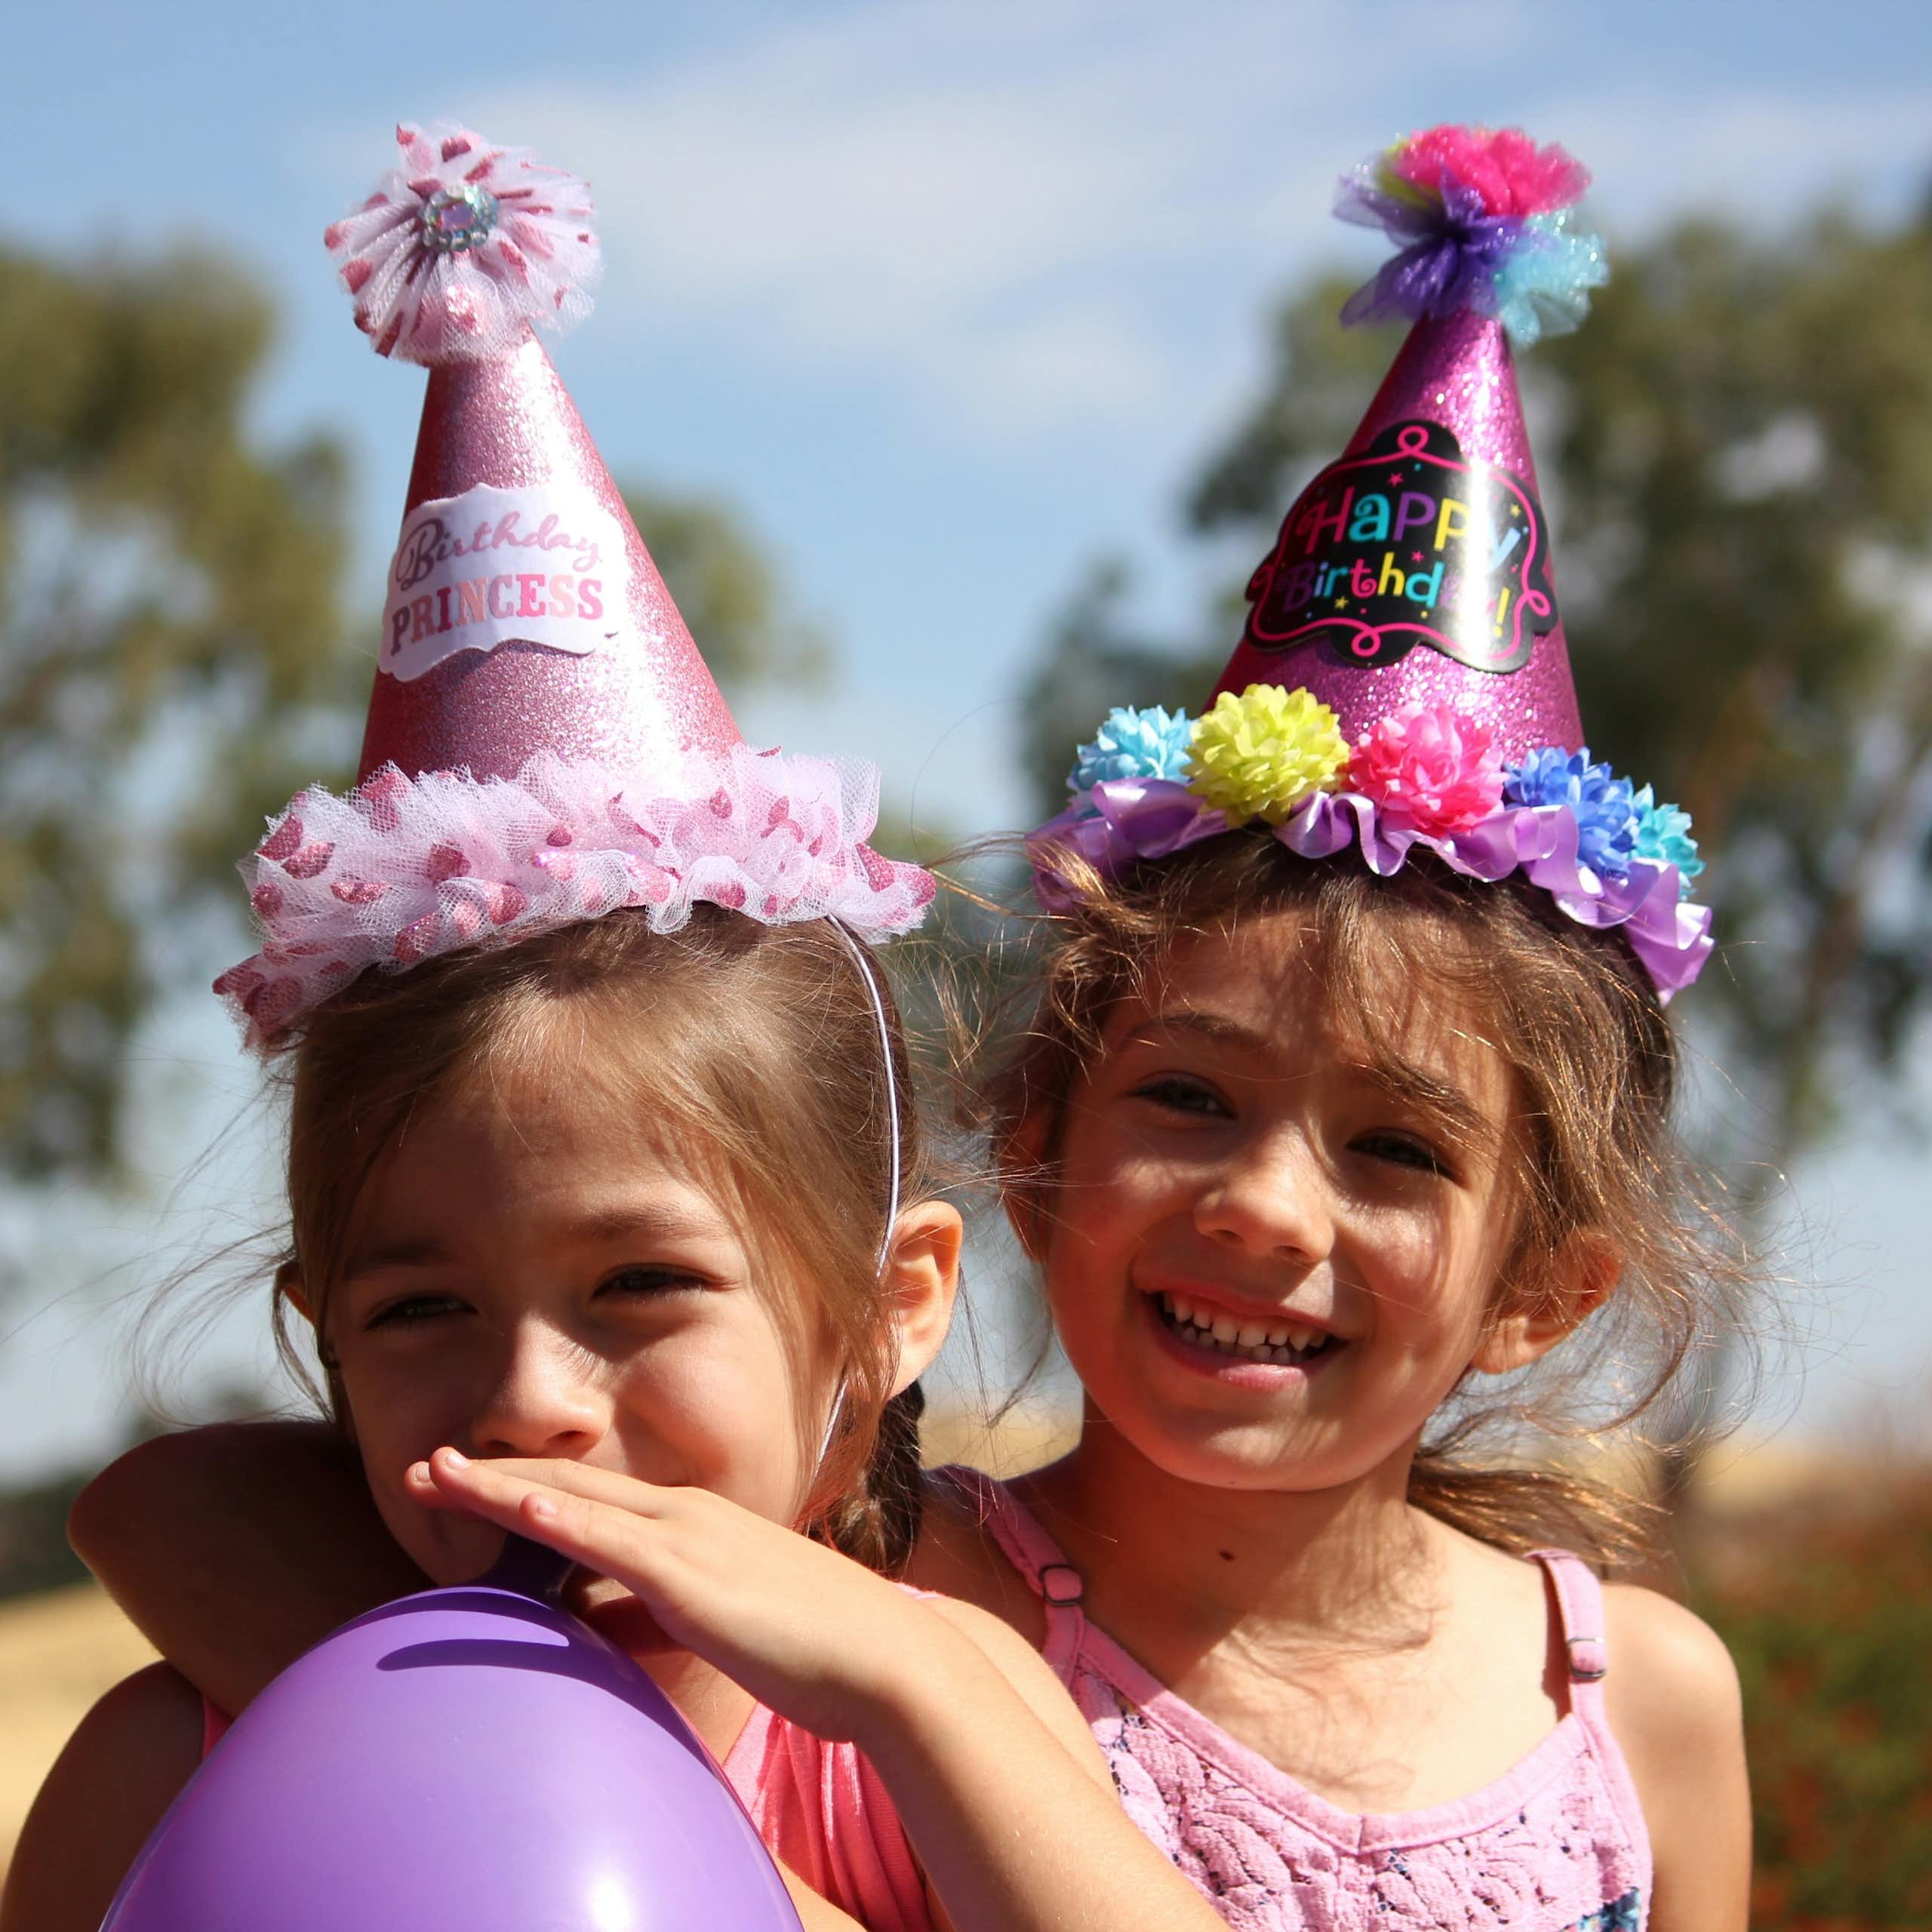 Girls wearing party hats smile